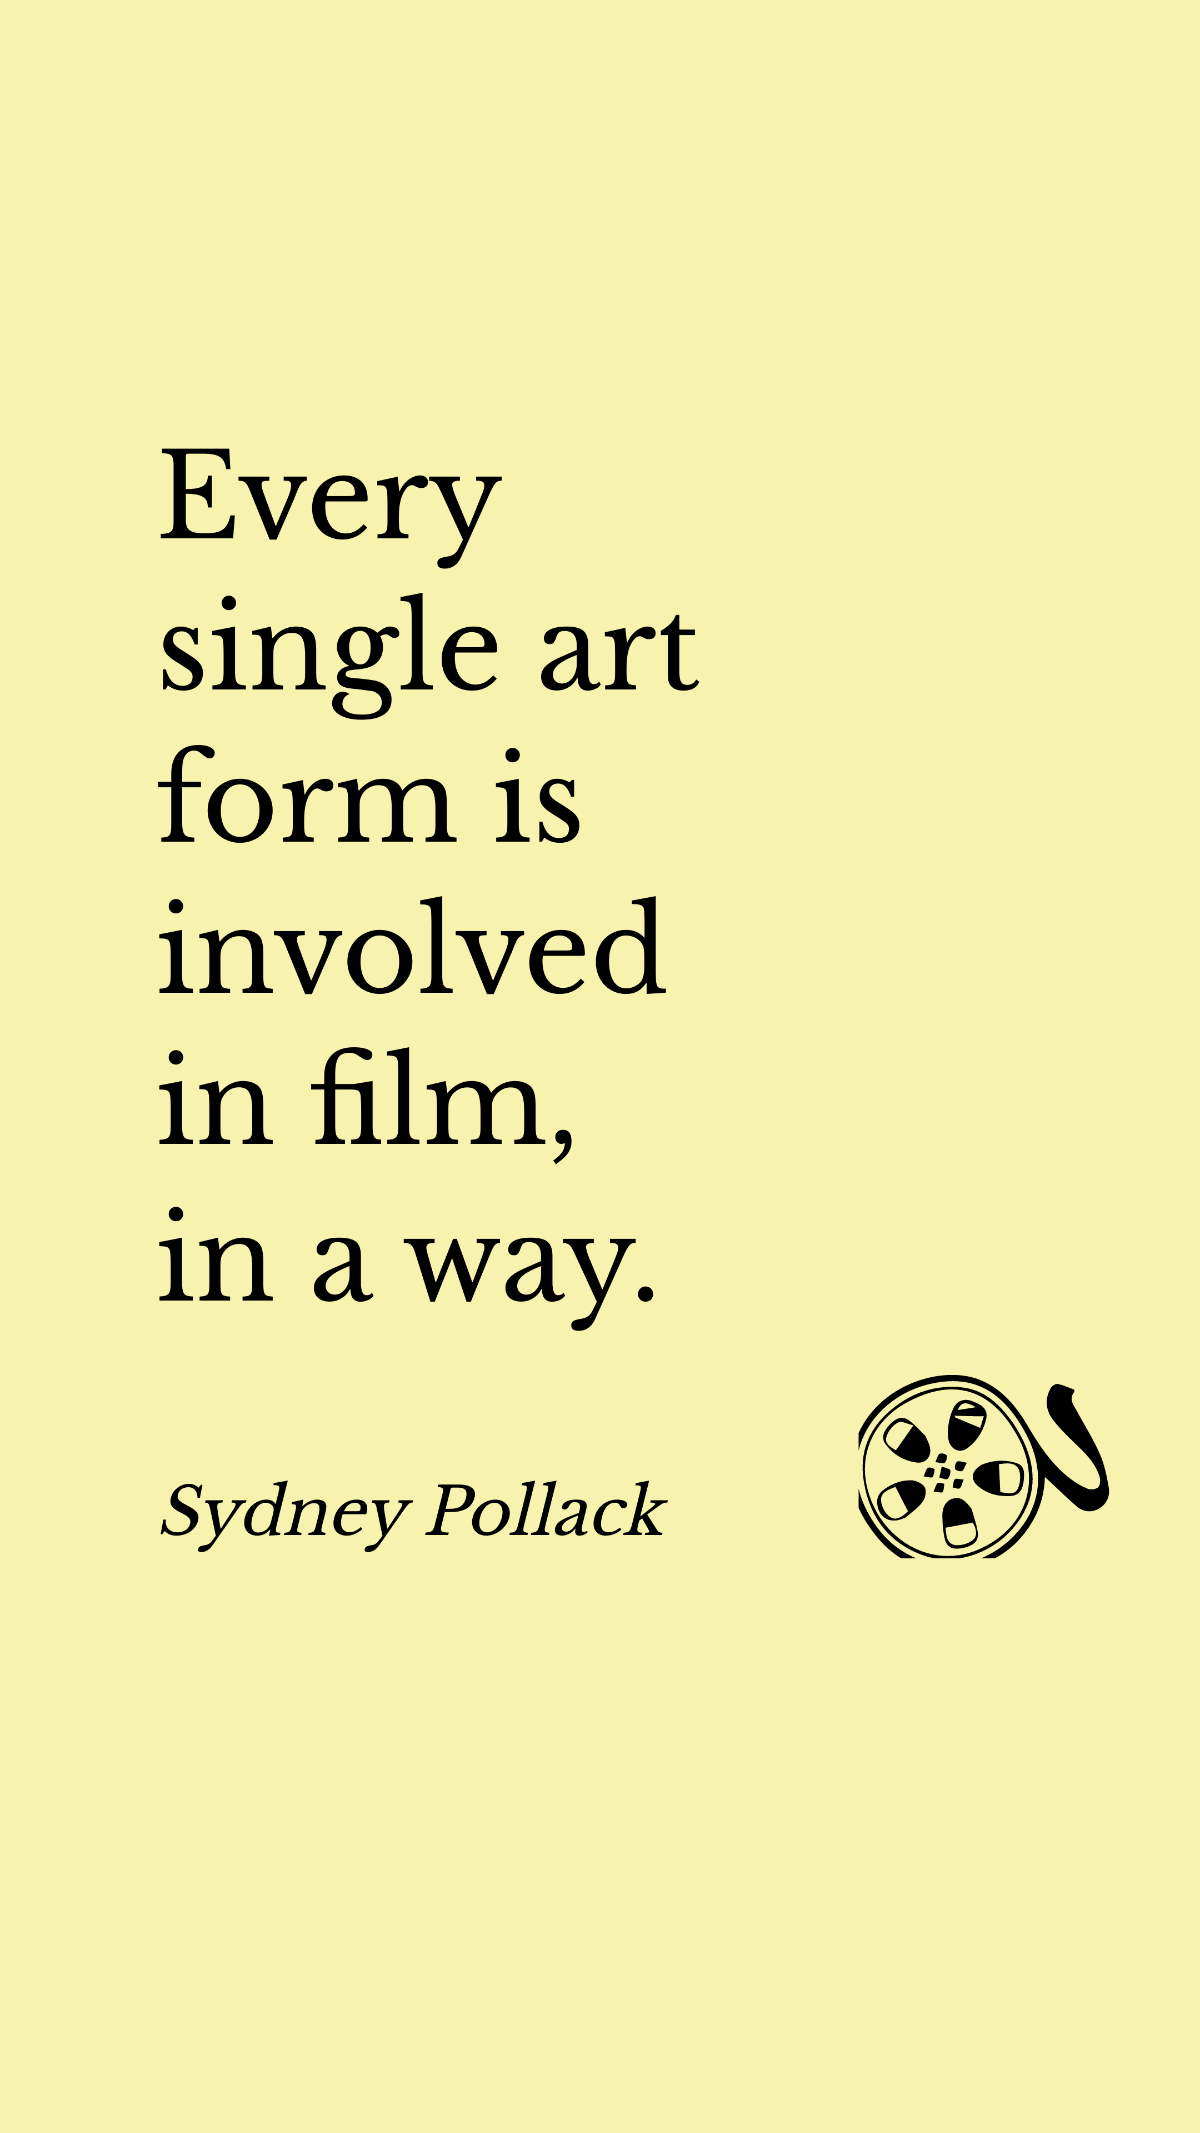 Sydney Pollack - Every single art form is involved in film, in a way.